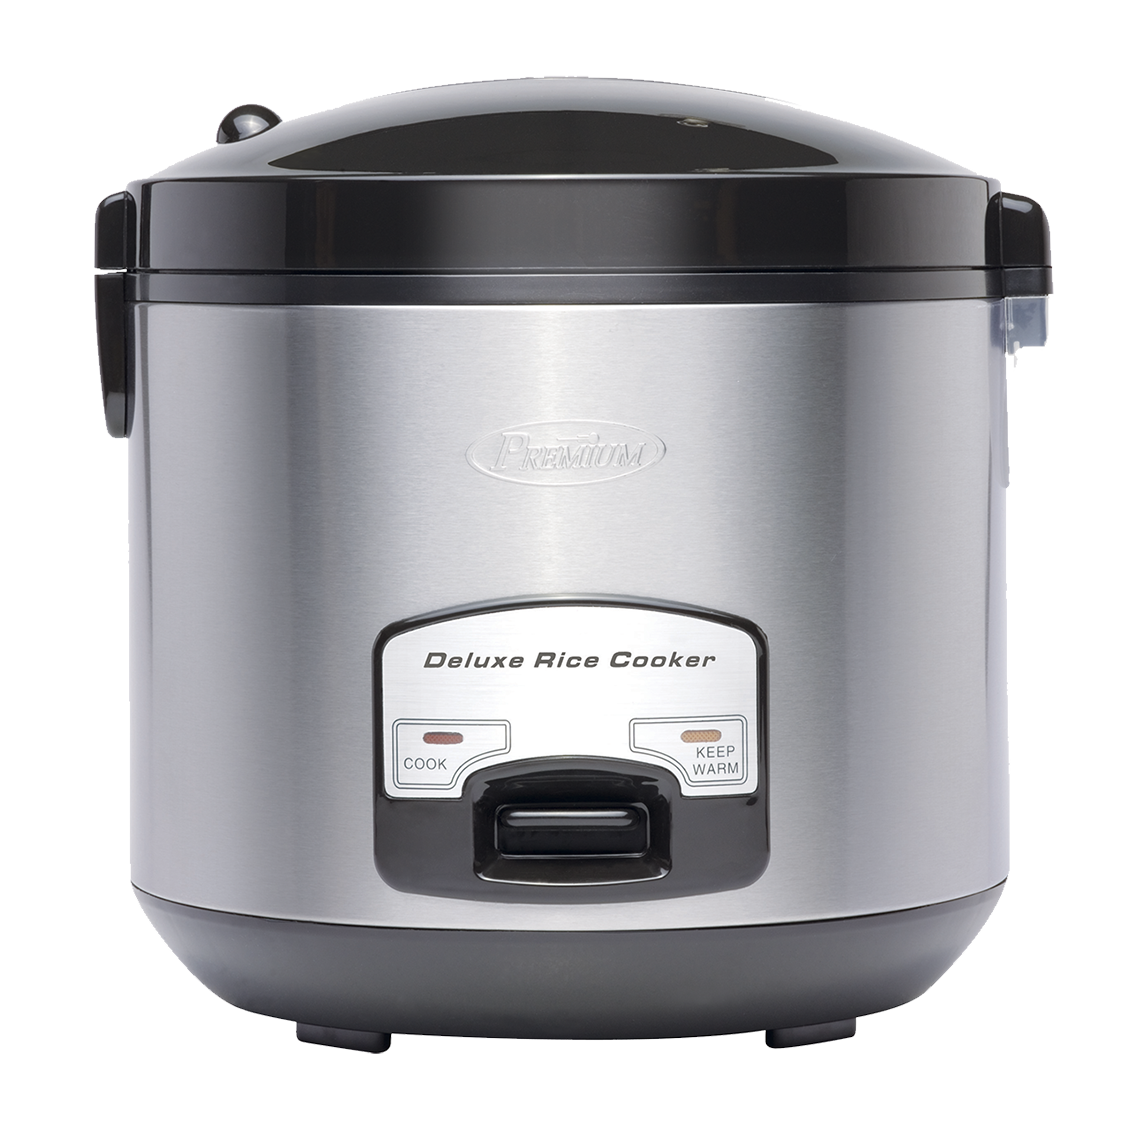 Premium Deluxe 20 Cup Cool Touch Rice Cooker and Warmer with Steam Baske. Stainless steel